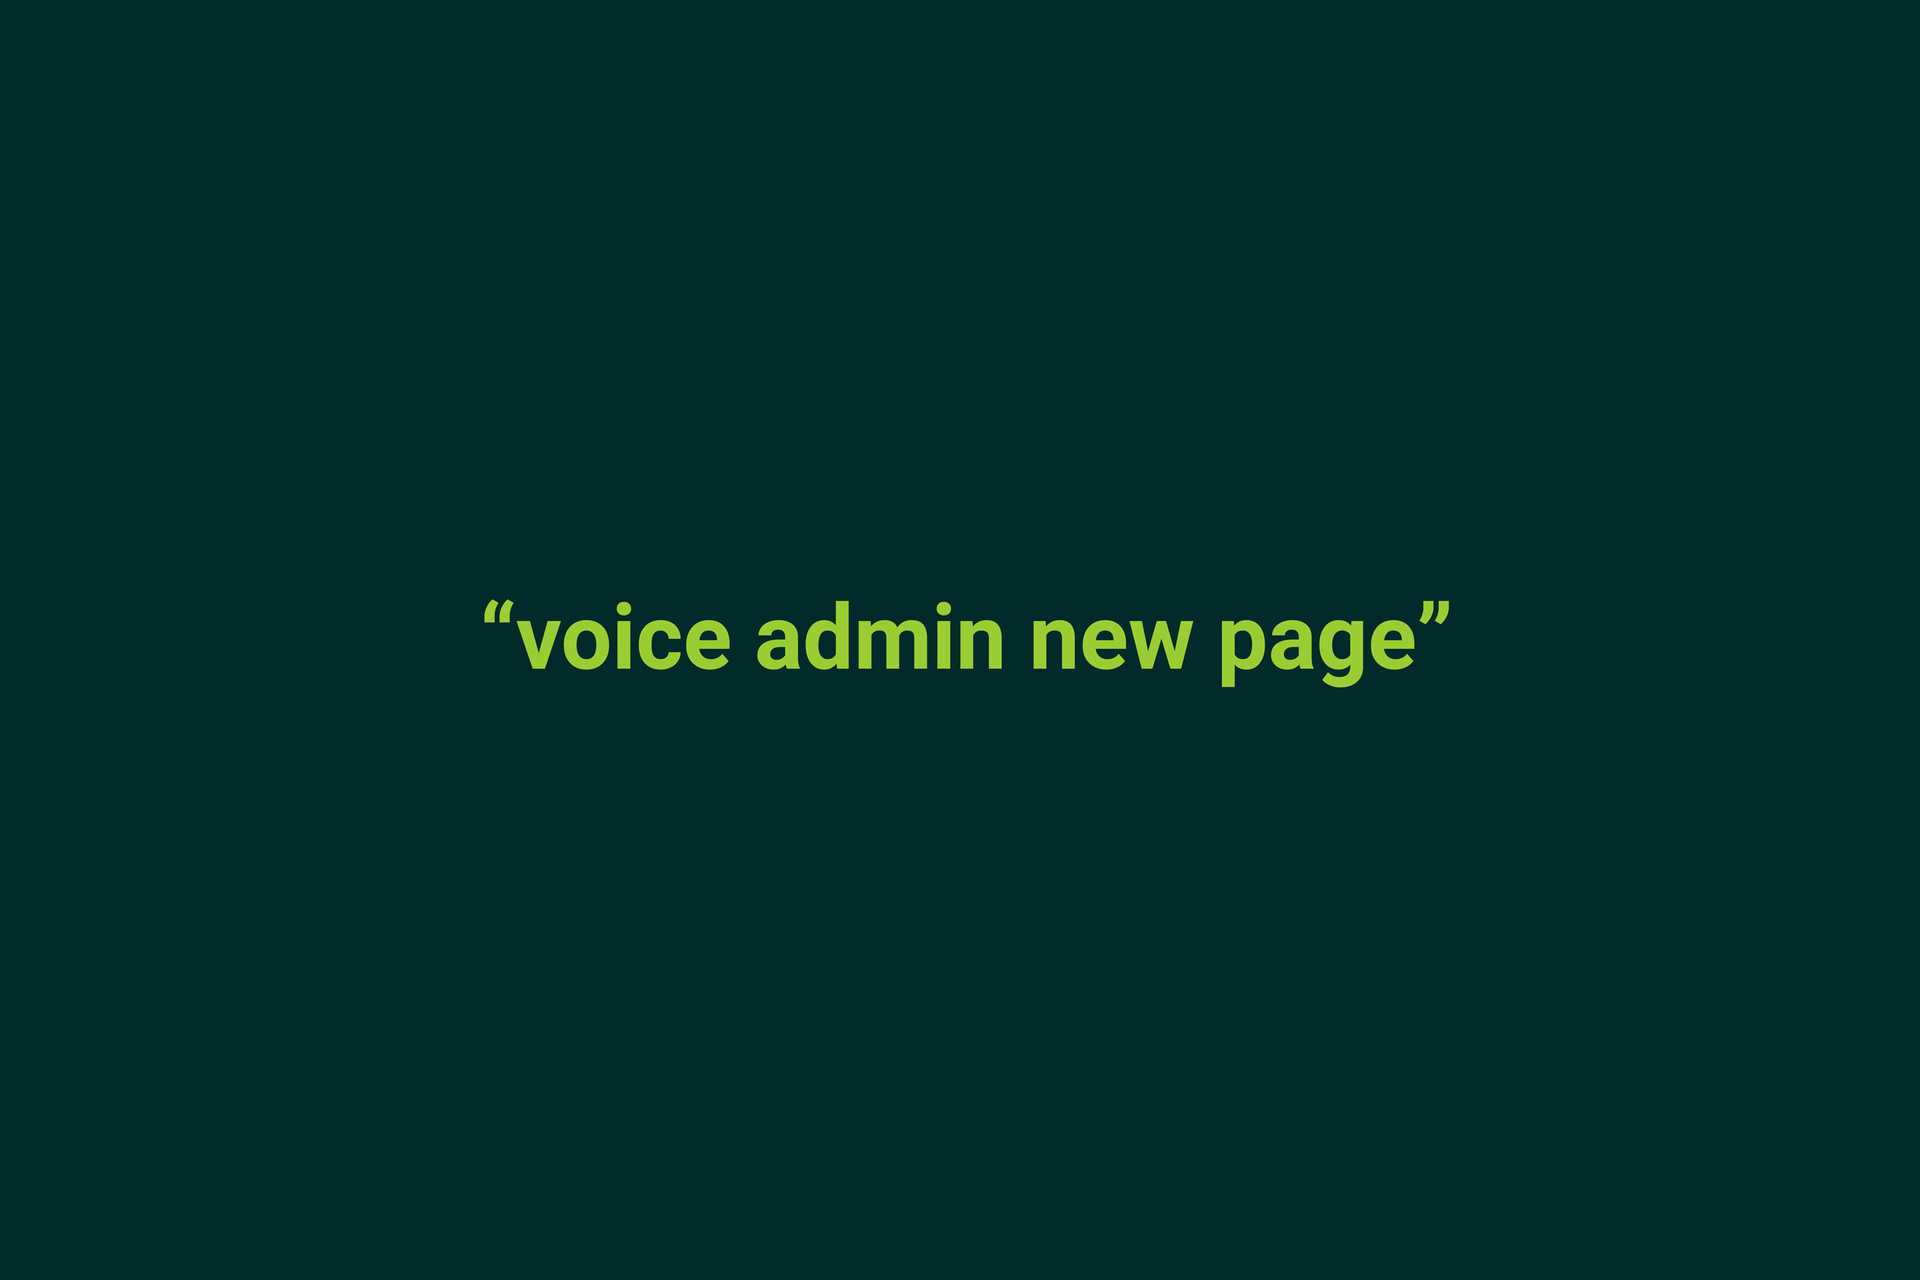 Speak "voice admin new page" to to to the node create form for basic page